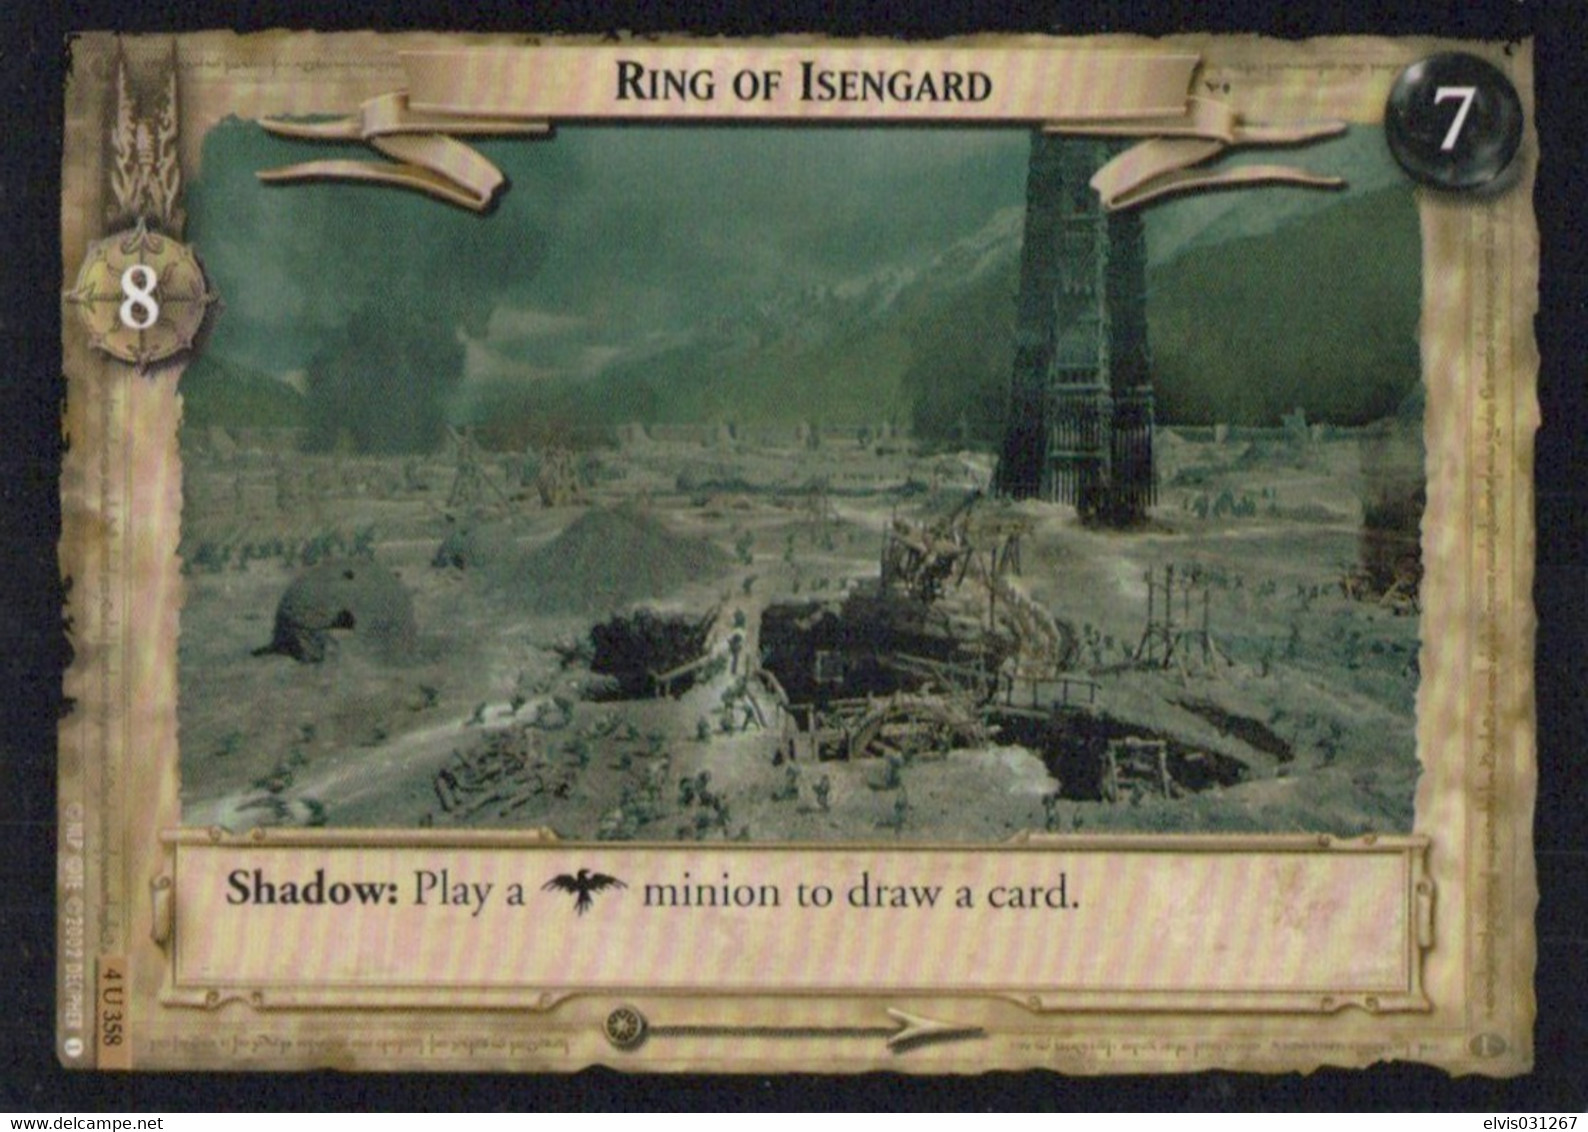 Vintage The Lord Of The Rings: #7-8 Ring Of Isengard - EN - 2001-2004 - Mint Condition - Trading Card Game - Lord Of The Rings